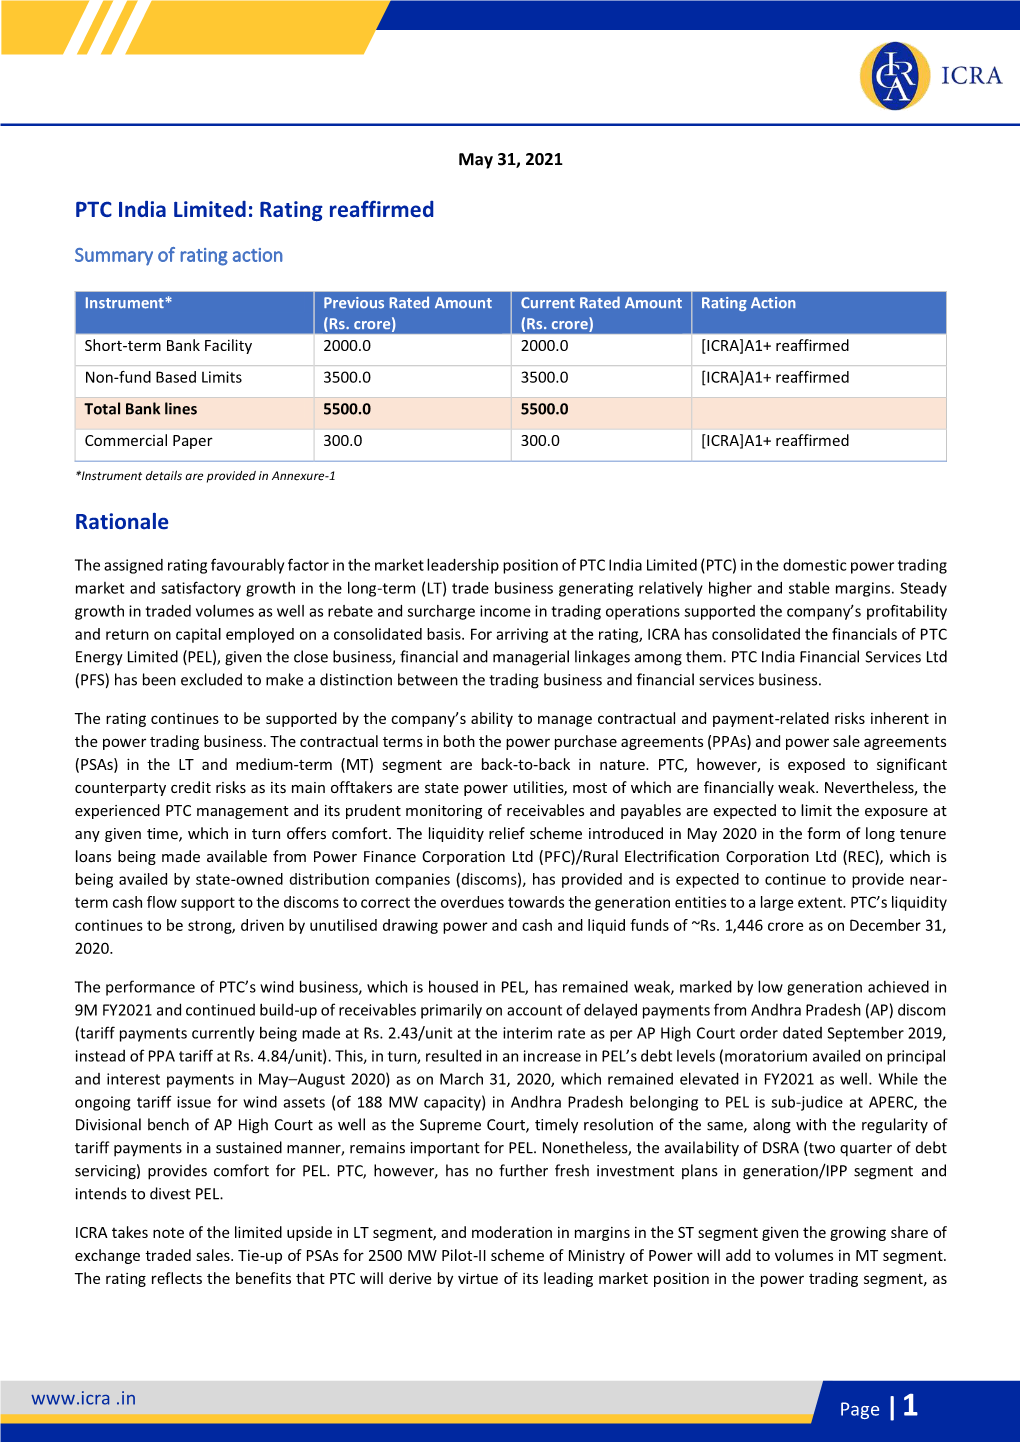 PTC India Limited: Rating Reaffirmed